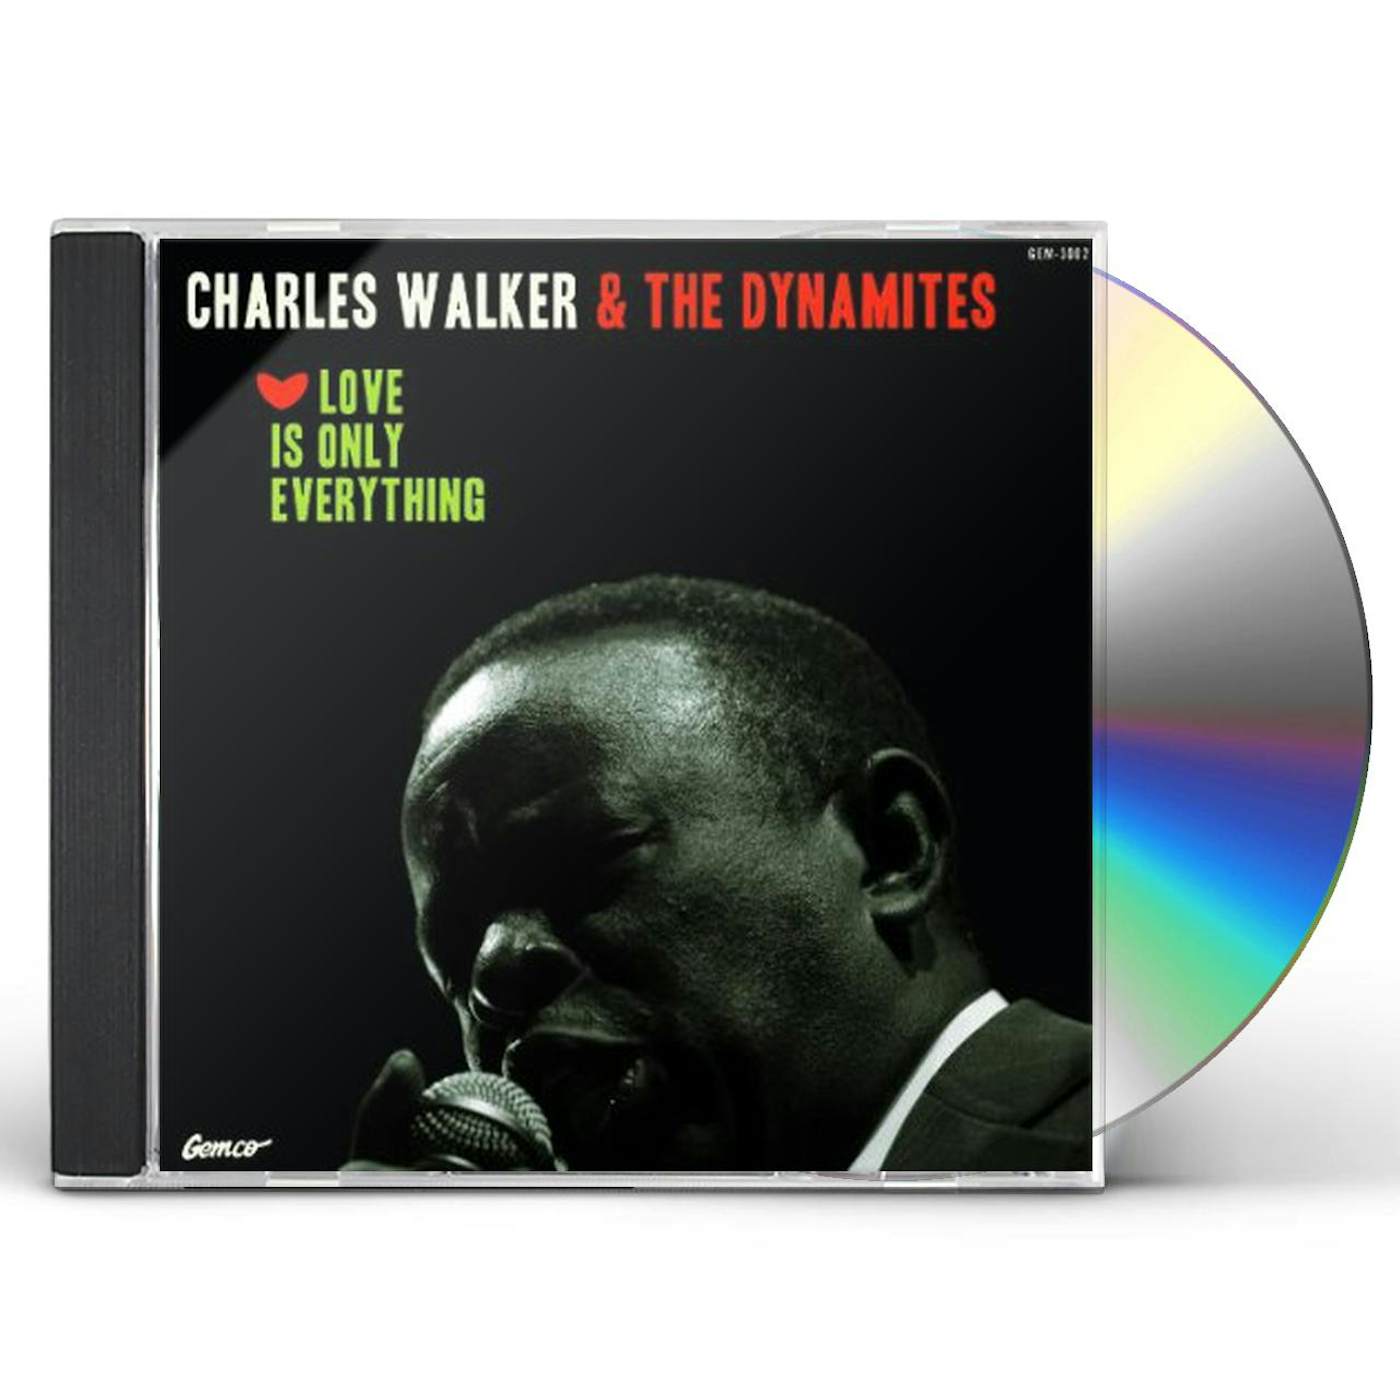 Charles Walker & The Dynamites LOVE IS ONLY EVERYTHING CD